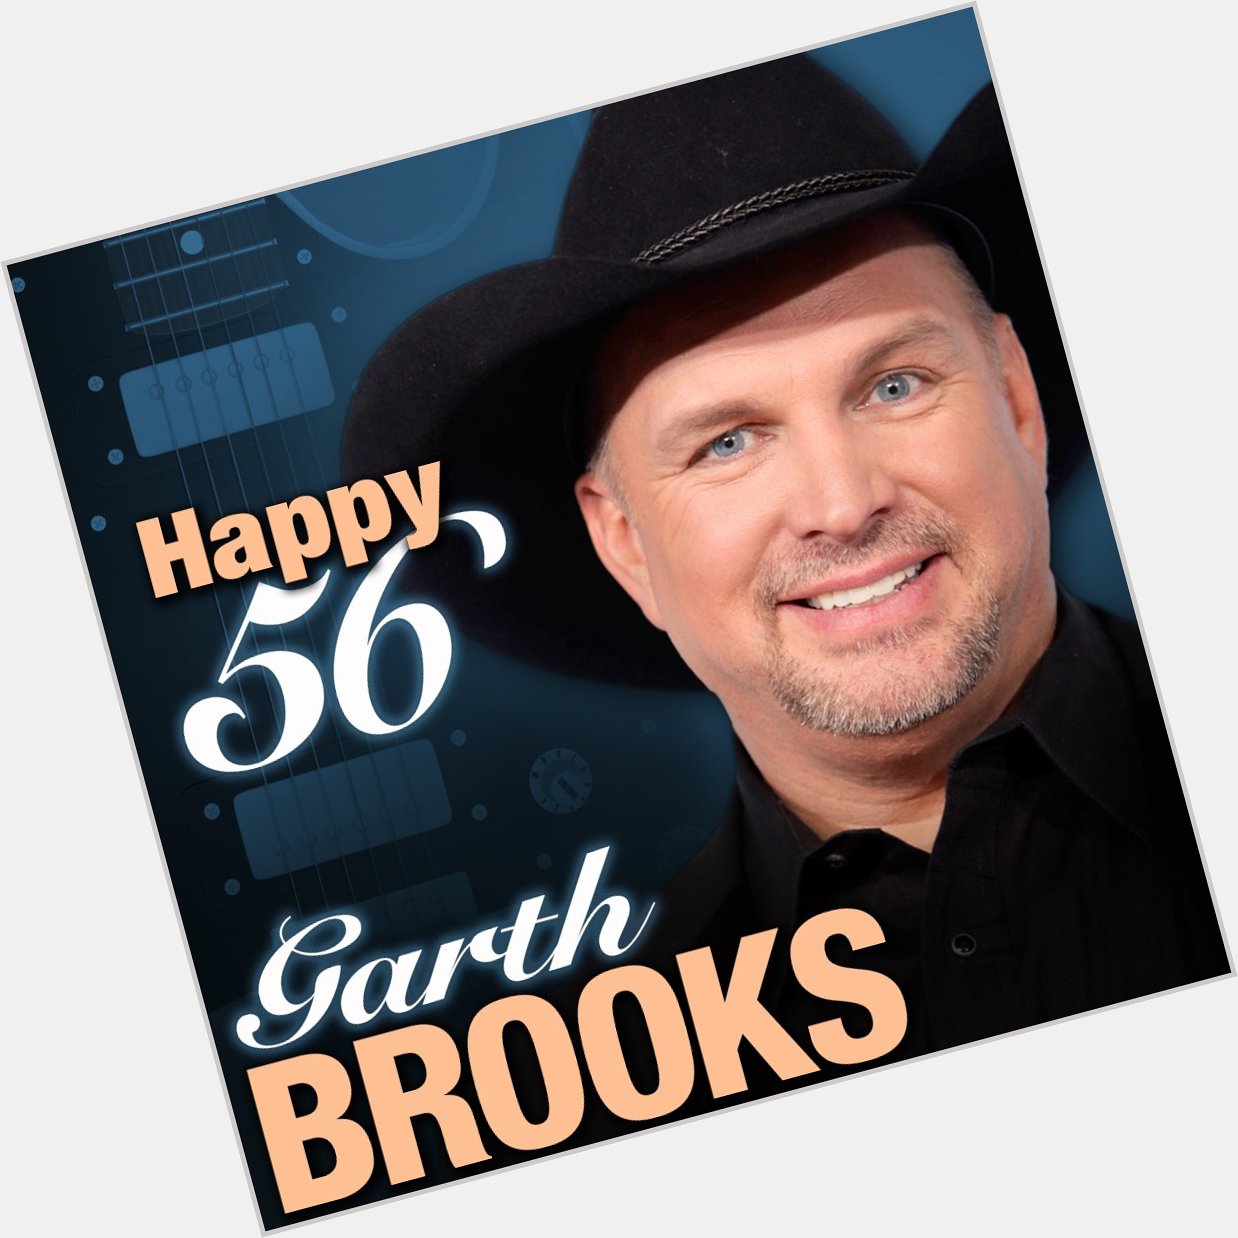 HAPPY BIRTHDAY to Garth Brooks! The singer/songwriter turns 56 today.  